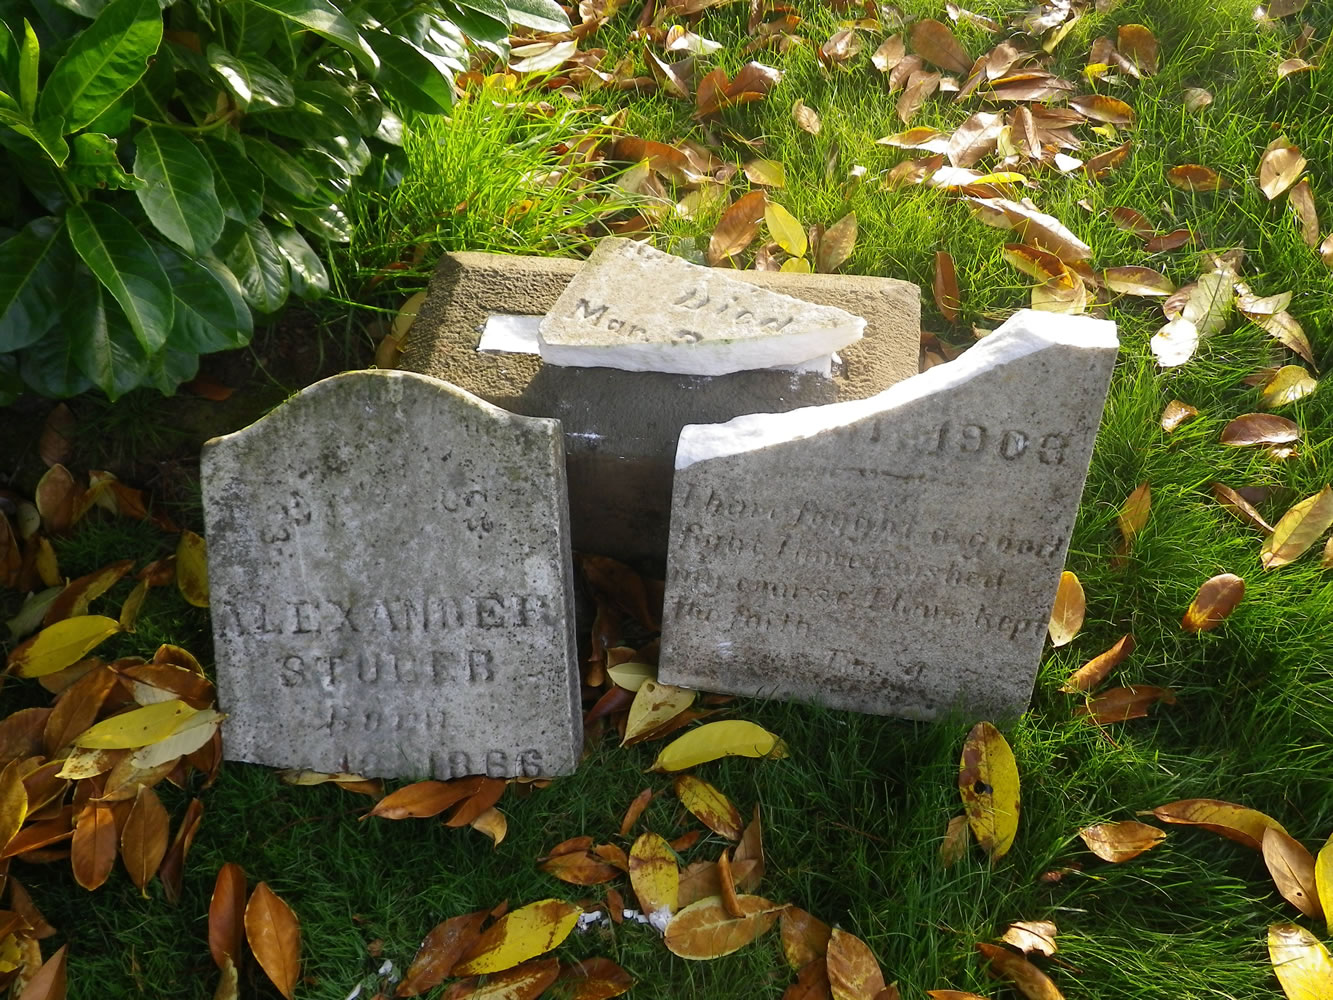 The gravestone of Alexander Stuber, who lived from 1866 to 1908, was the only one that was broken as a result of vandalism at the Camas Cemetery. Fourteen other markers were placed back on their pedestals.